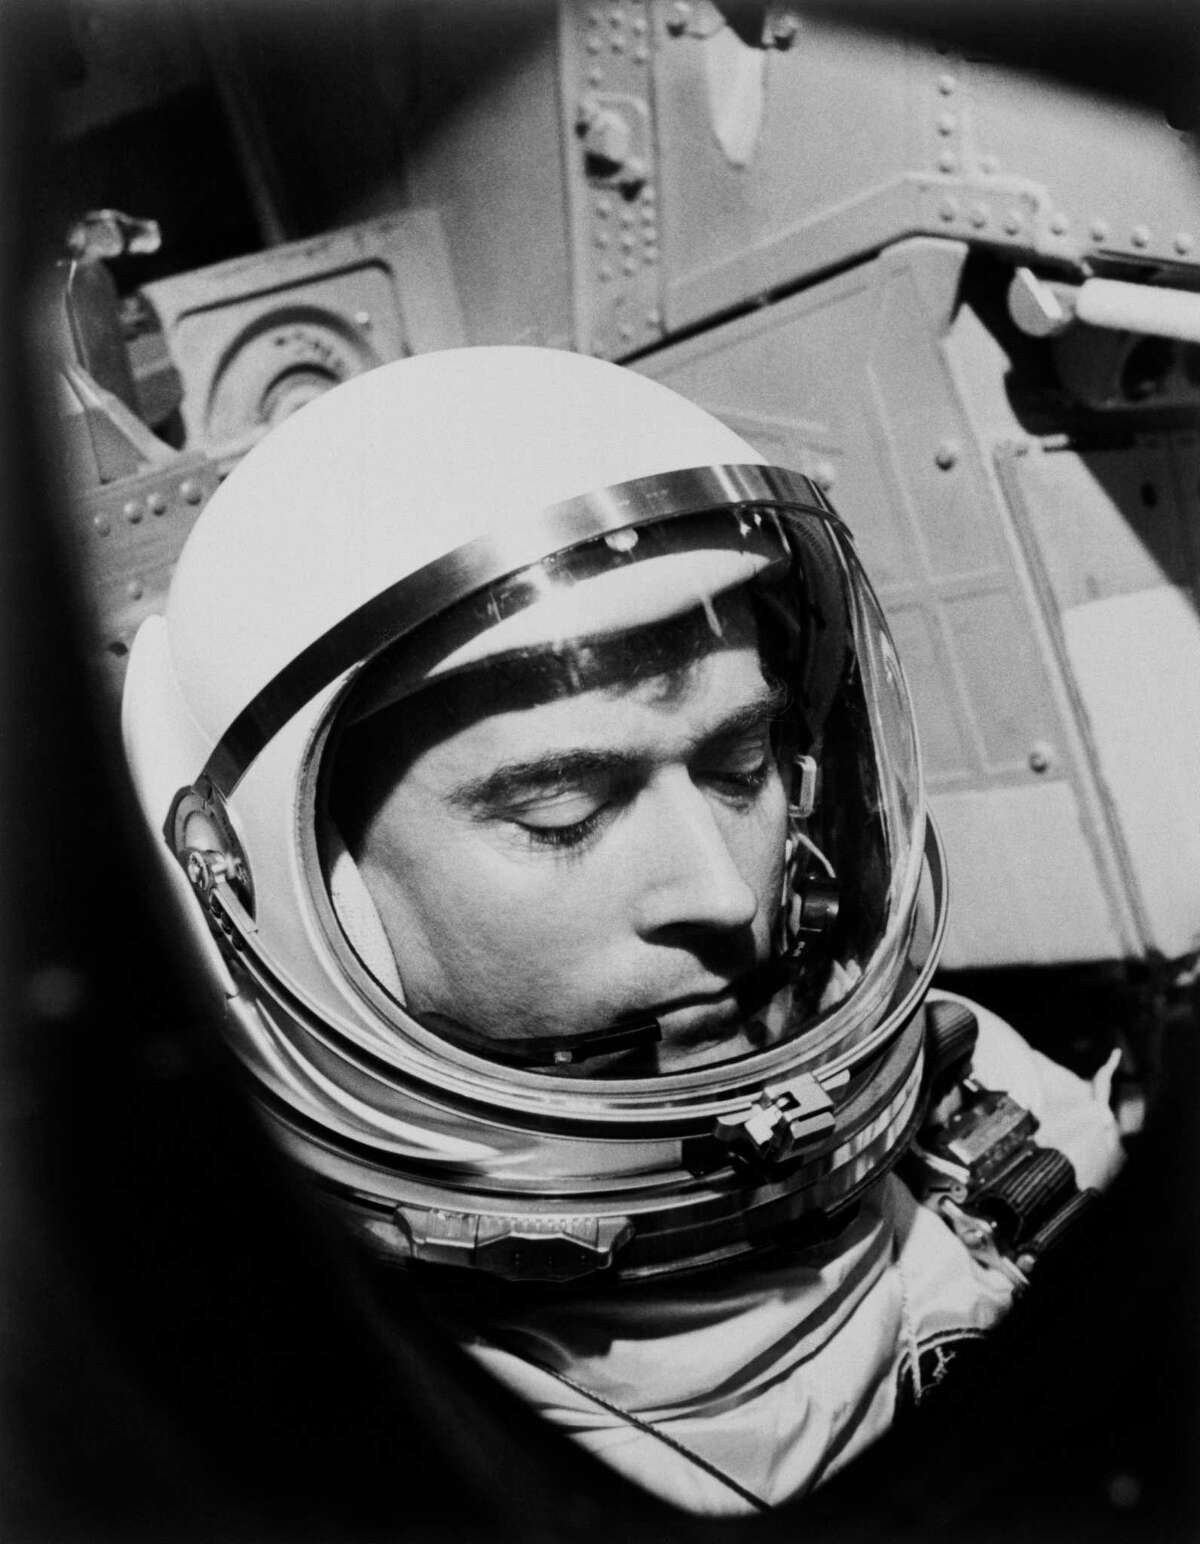 This 1965 photo made available by NASA shows John Young during the Gemini 3 mission. NASA says the astronaut, who walked on the moon and later commanded the first space shuttle flight, died on Friday, Jan. 5, 2018. He was 87.